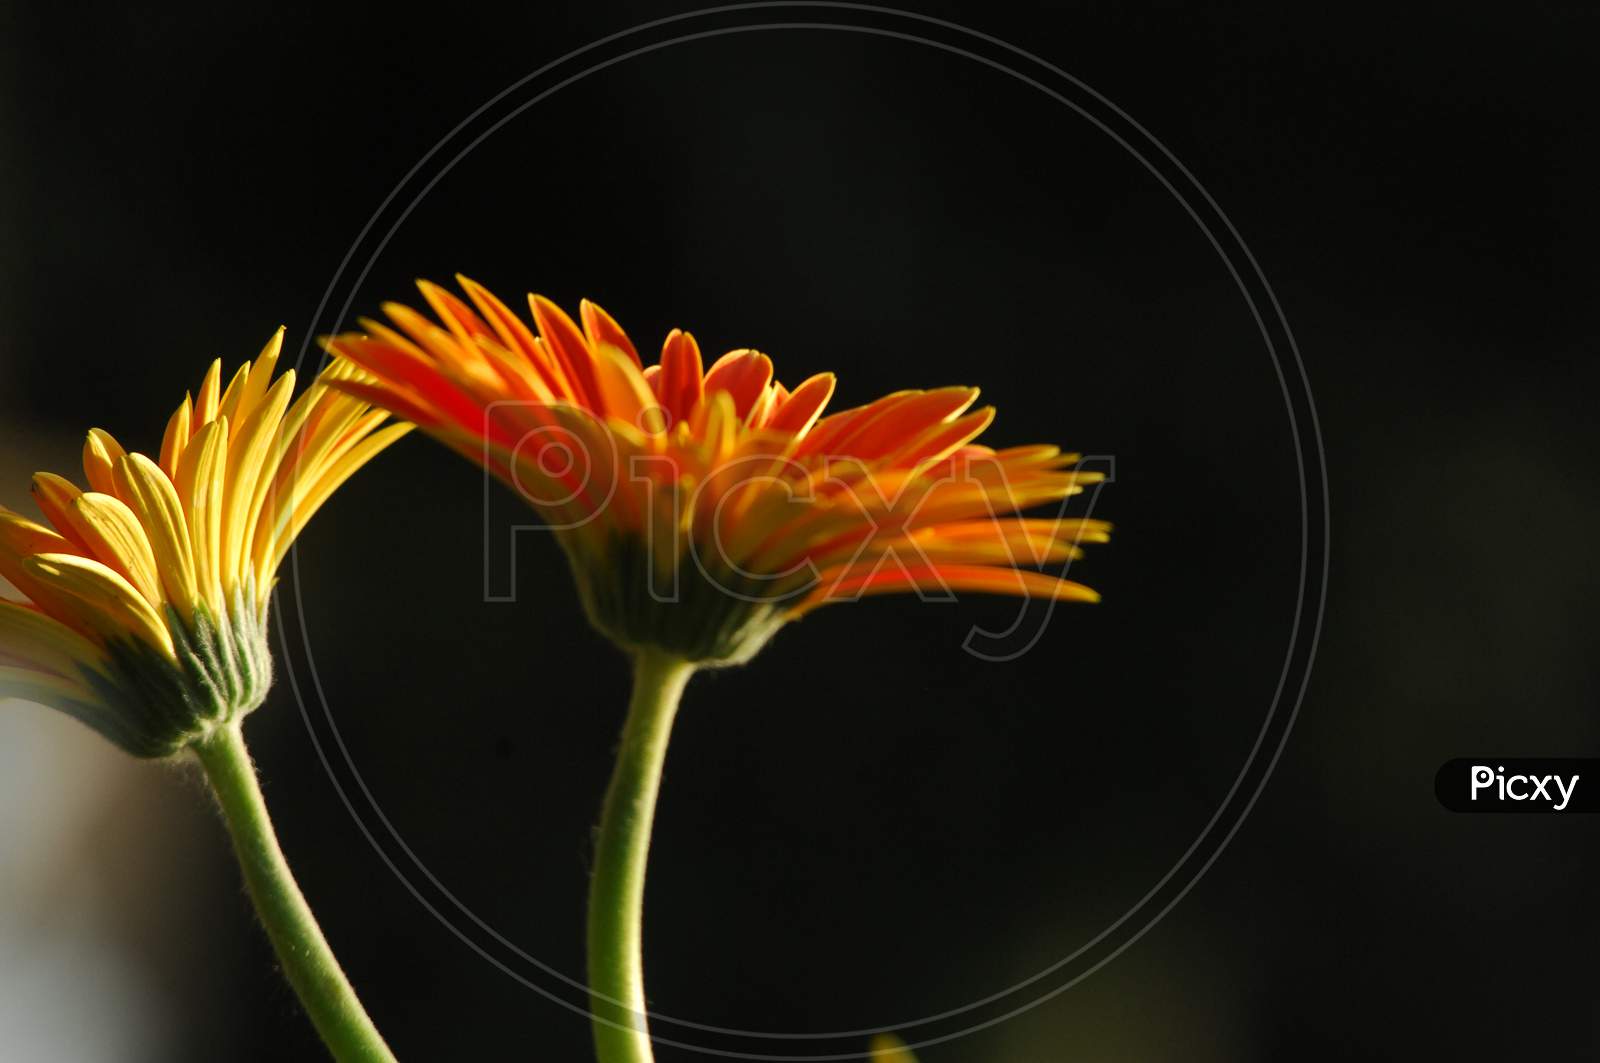 Flowers Blooming On Plants Closeup Forming a Background